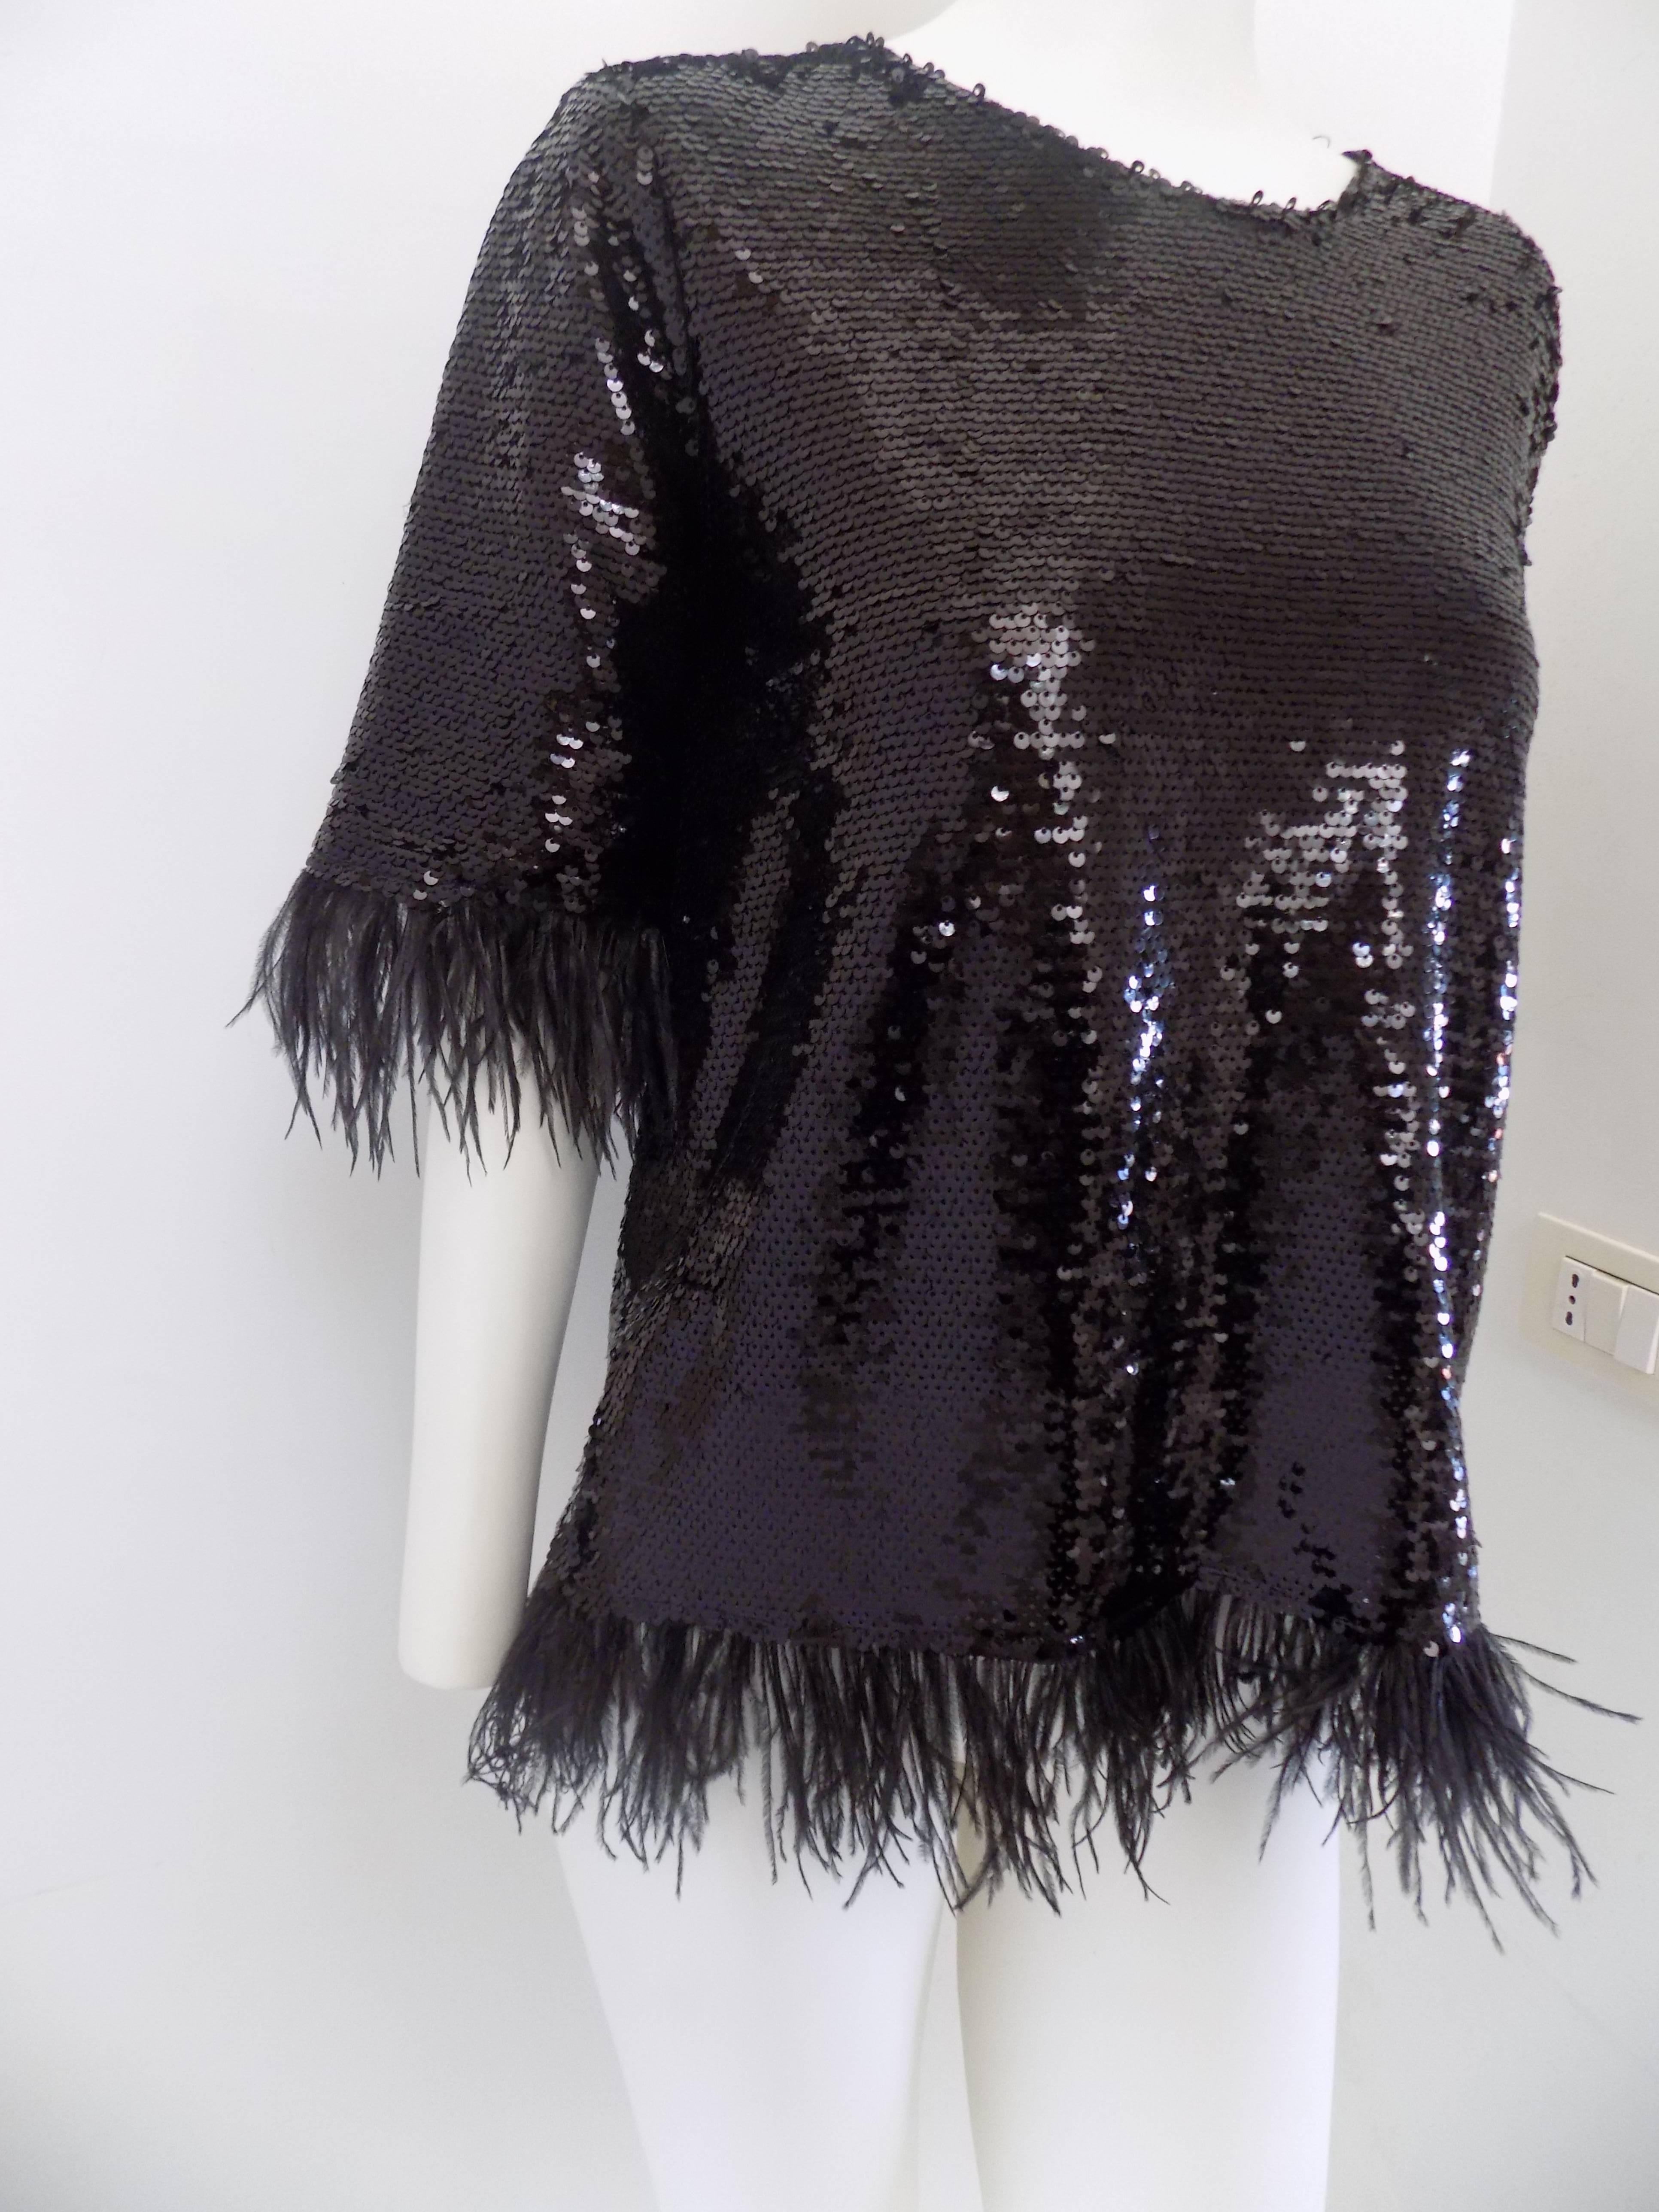 Black sequins shirt IVIVI totally made in italy in italian size range m/l
